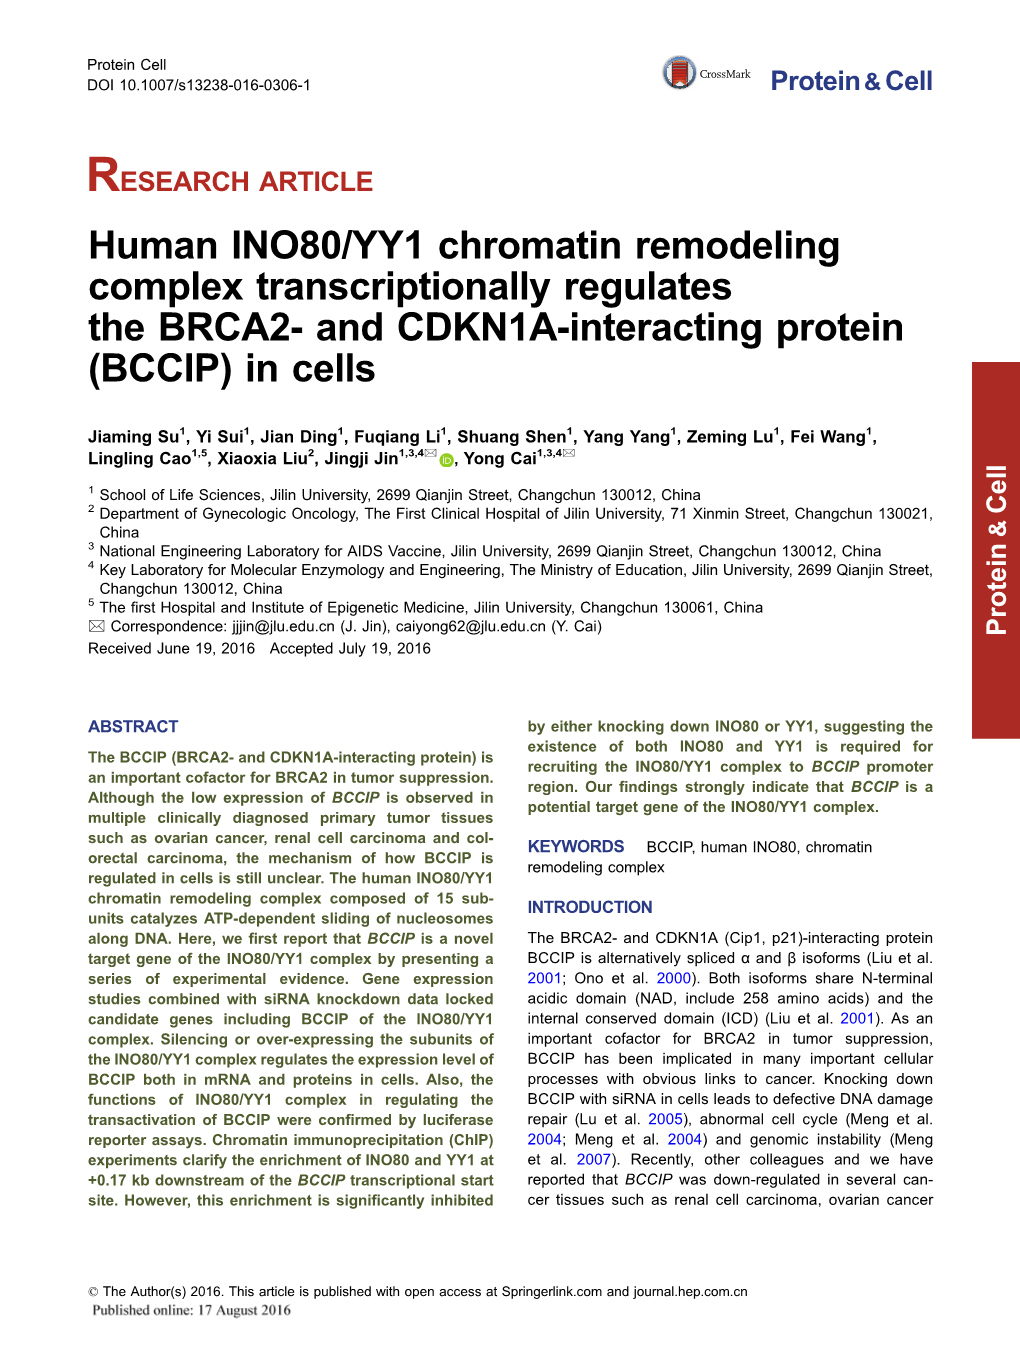 And CDKN1A-Interacting Protein (BCCIP) in Cells